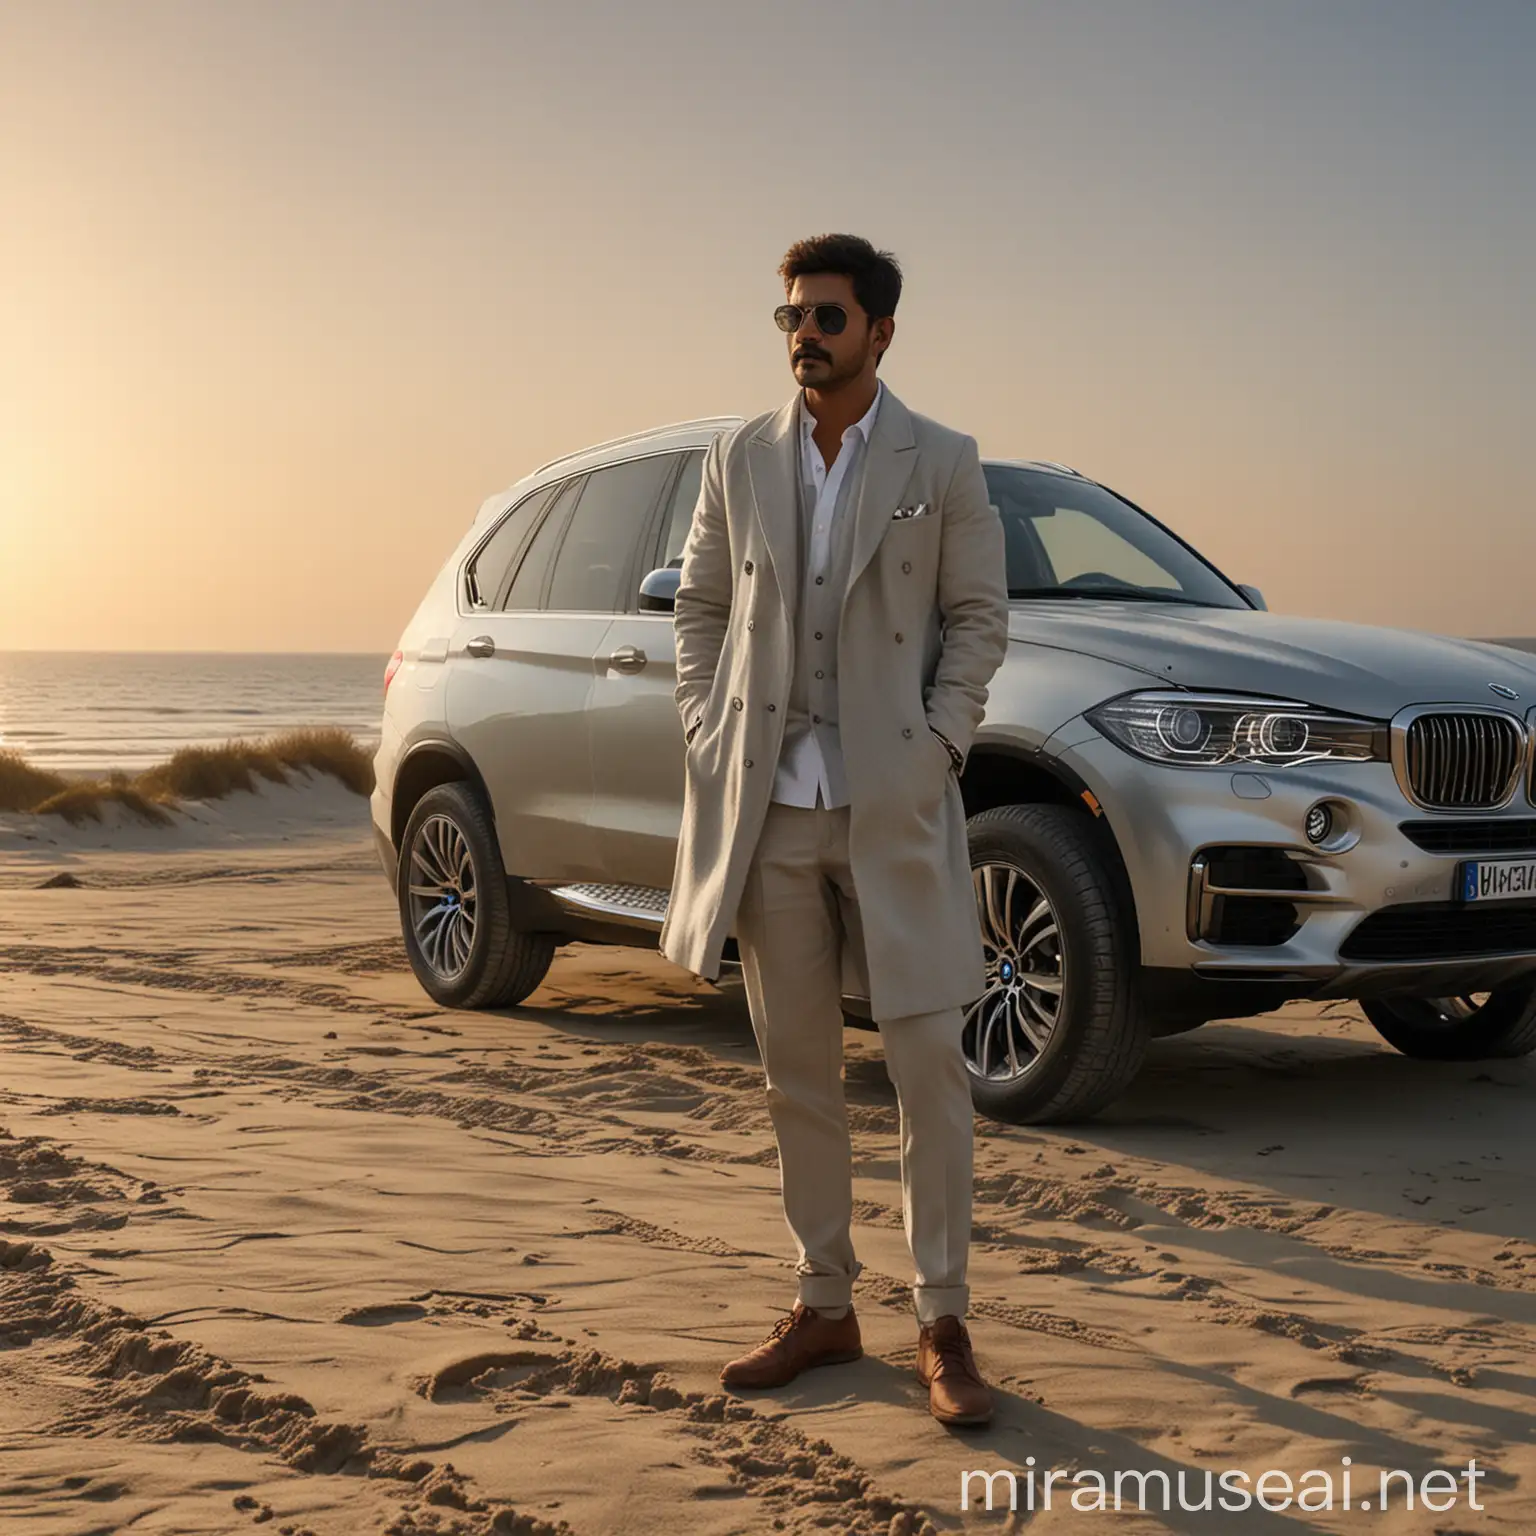 Ultra realistic, cinematic, actor vijay with coat going to near by bmw x5 car silver color, beach sand, sun set